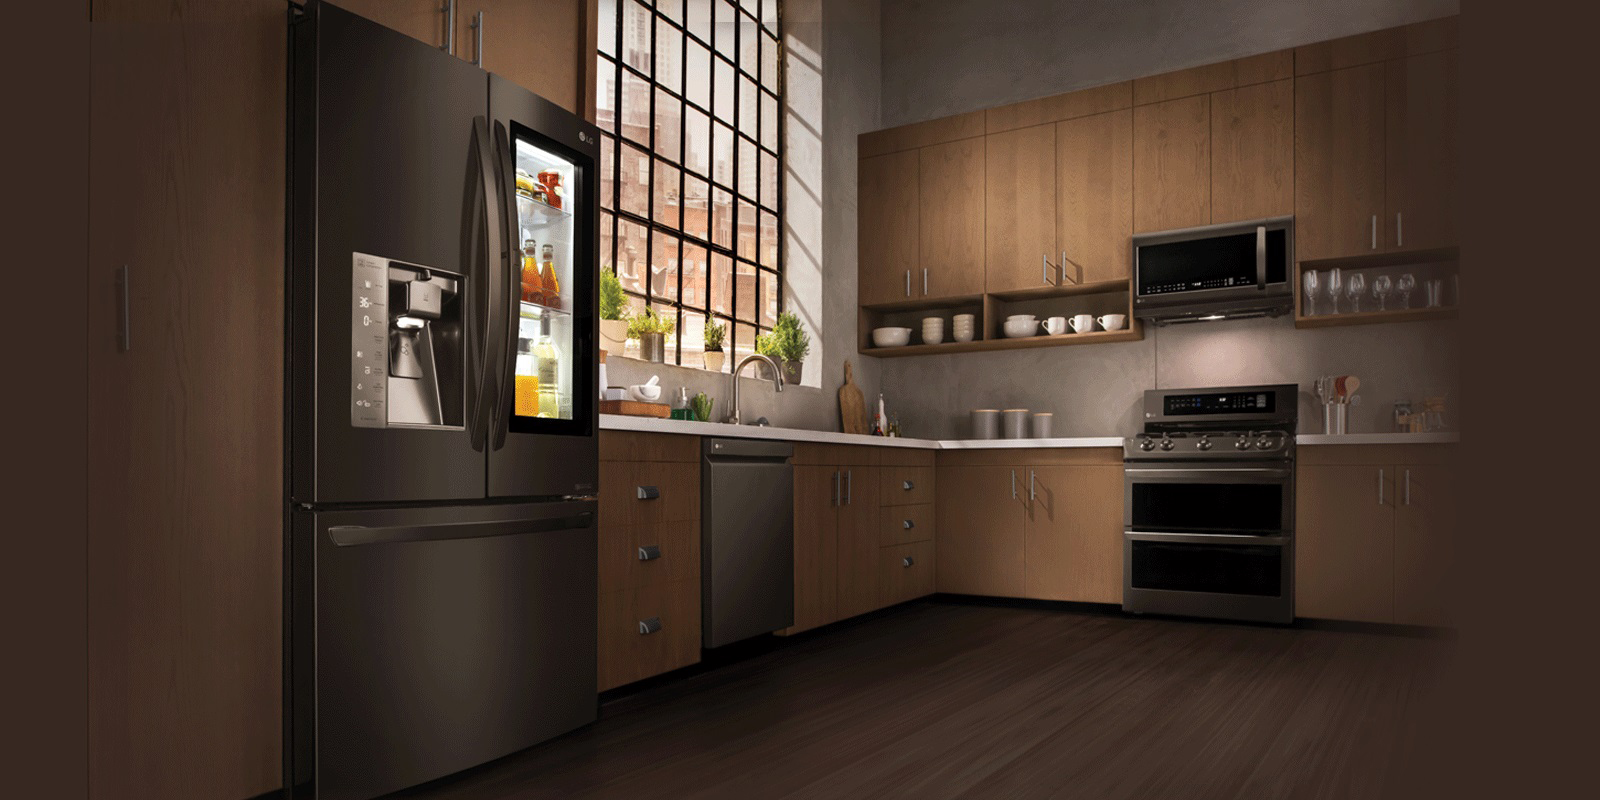 Tips for Buying Appliances in Your Kitchen - Women Daily Magazine